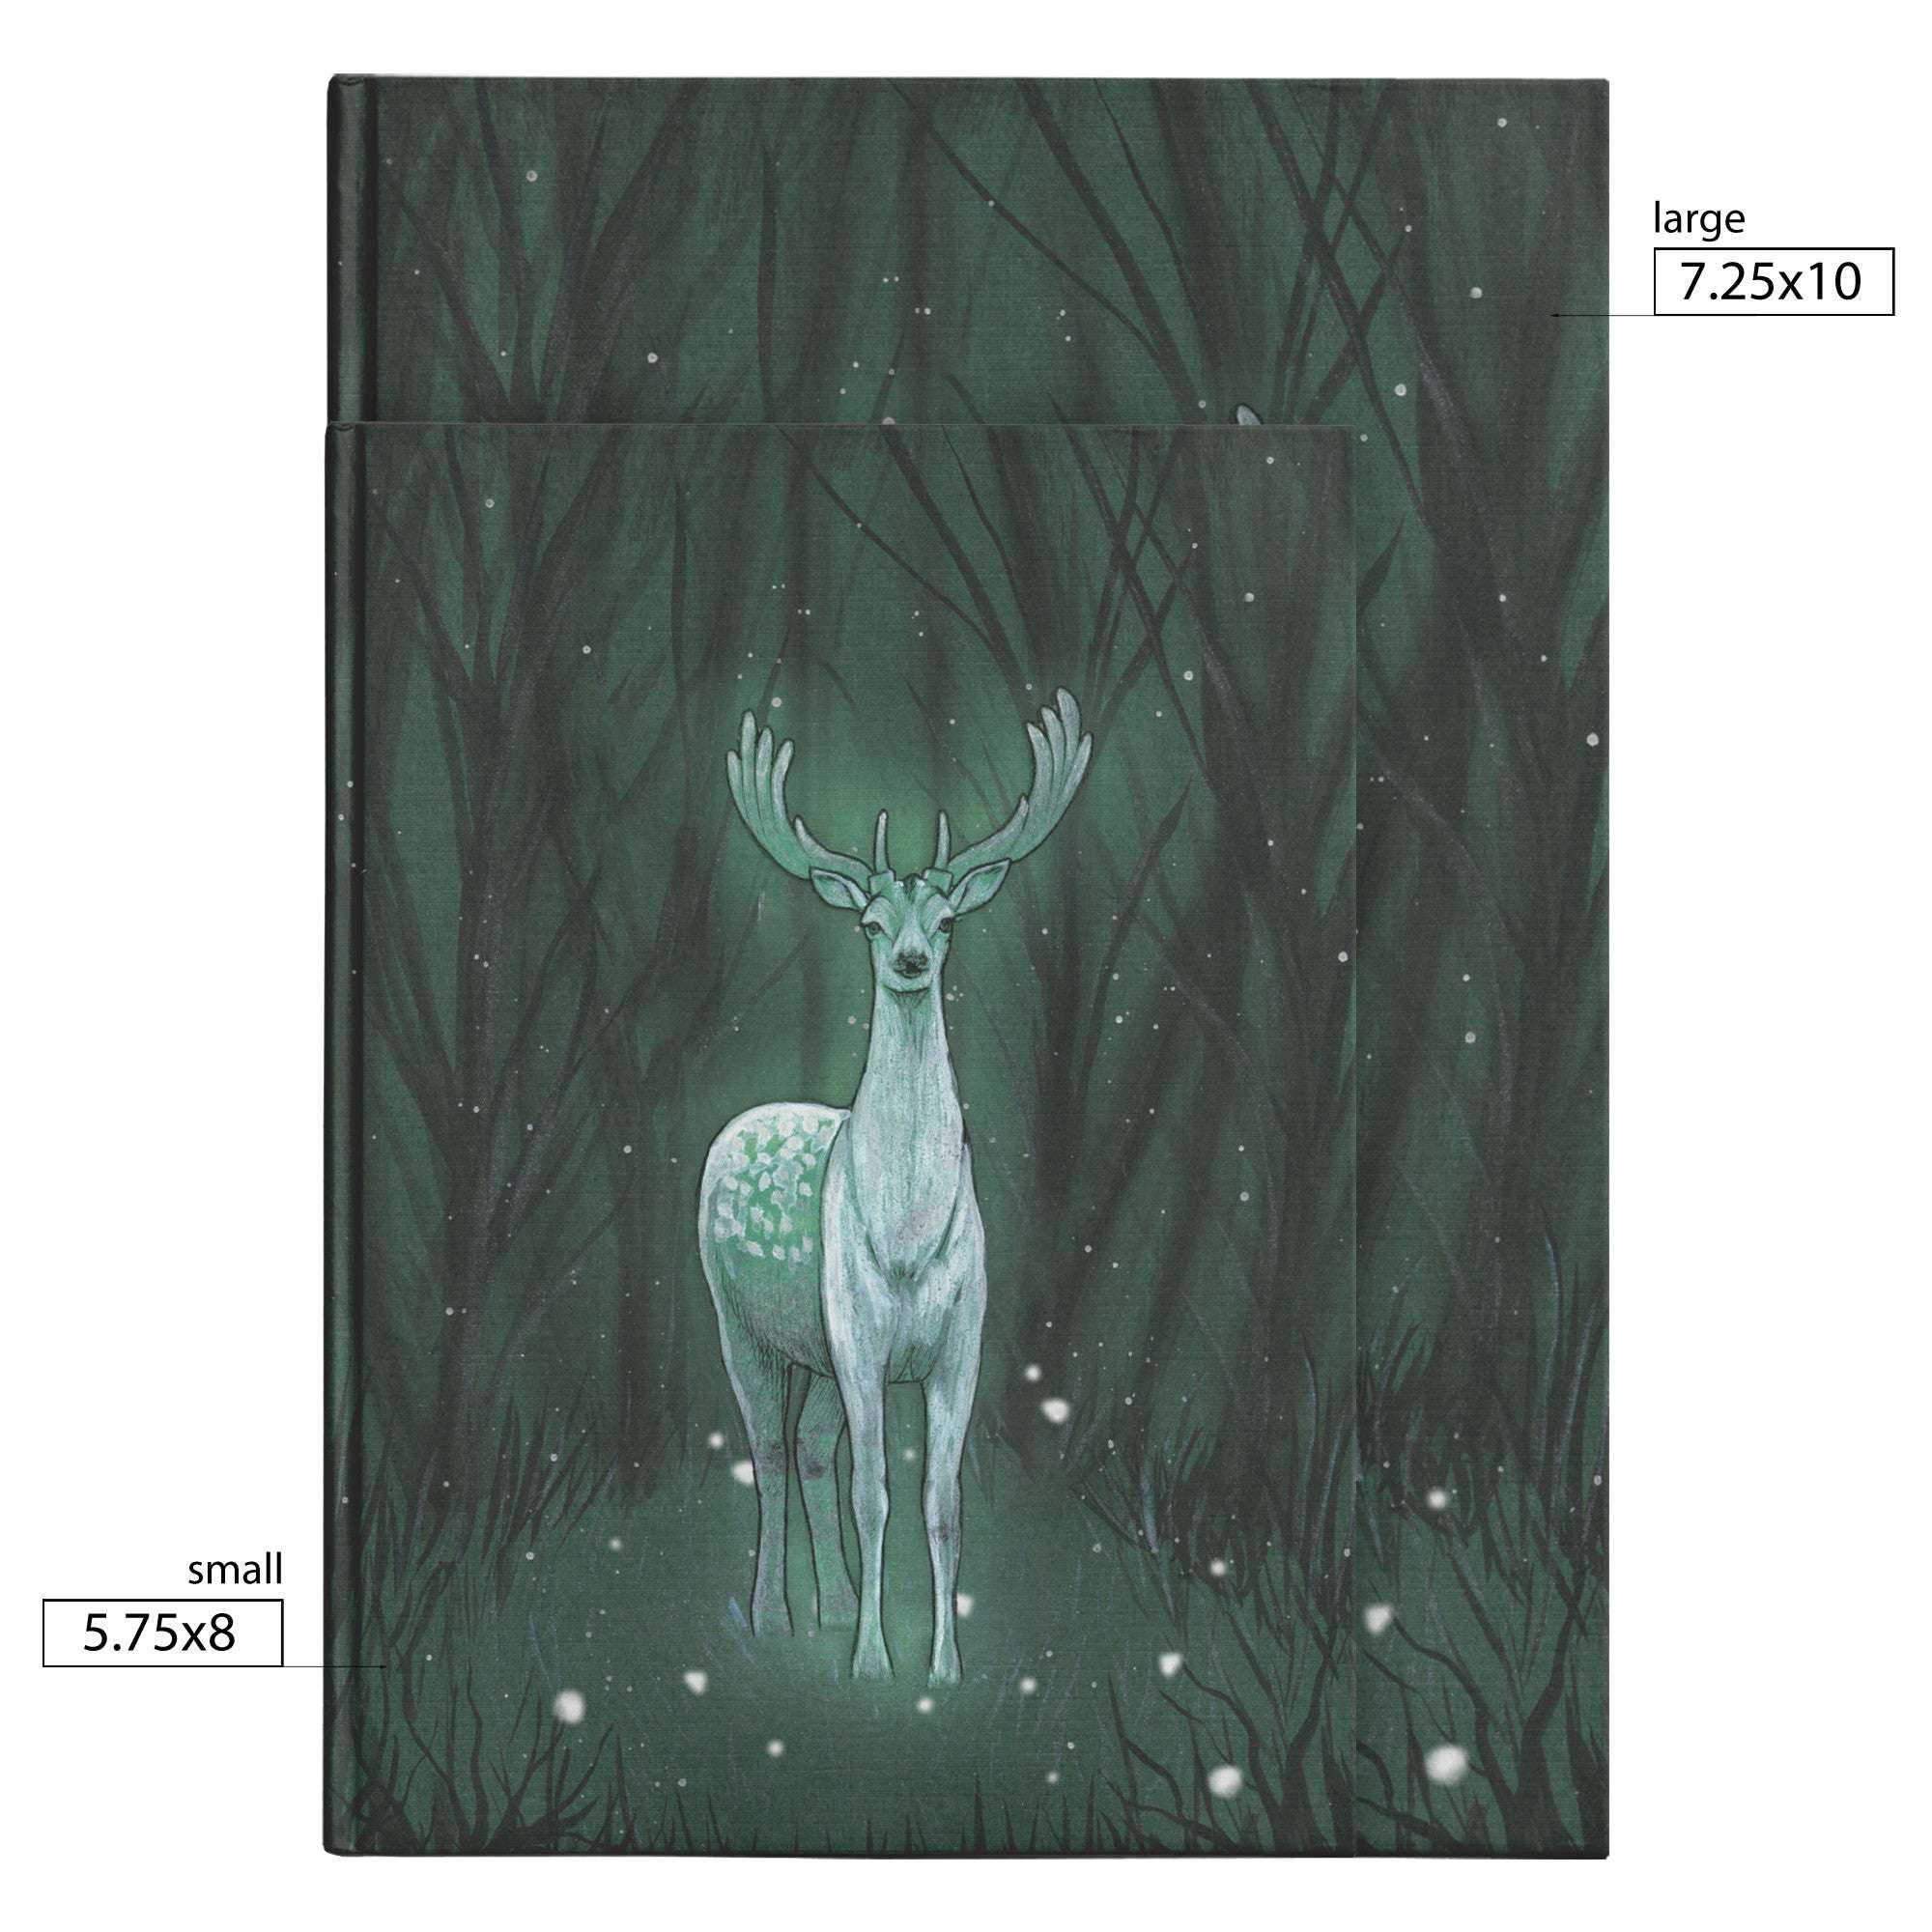 Enchanted Deer Journal with an illustration of a white deer standing in a snowy forest, available in two sizes: small (5.75x8) and large (7.25x10).